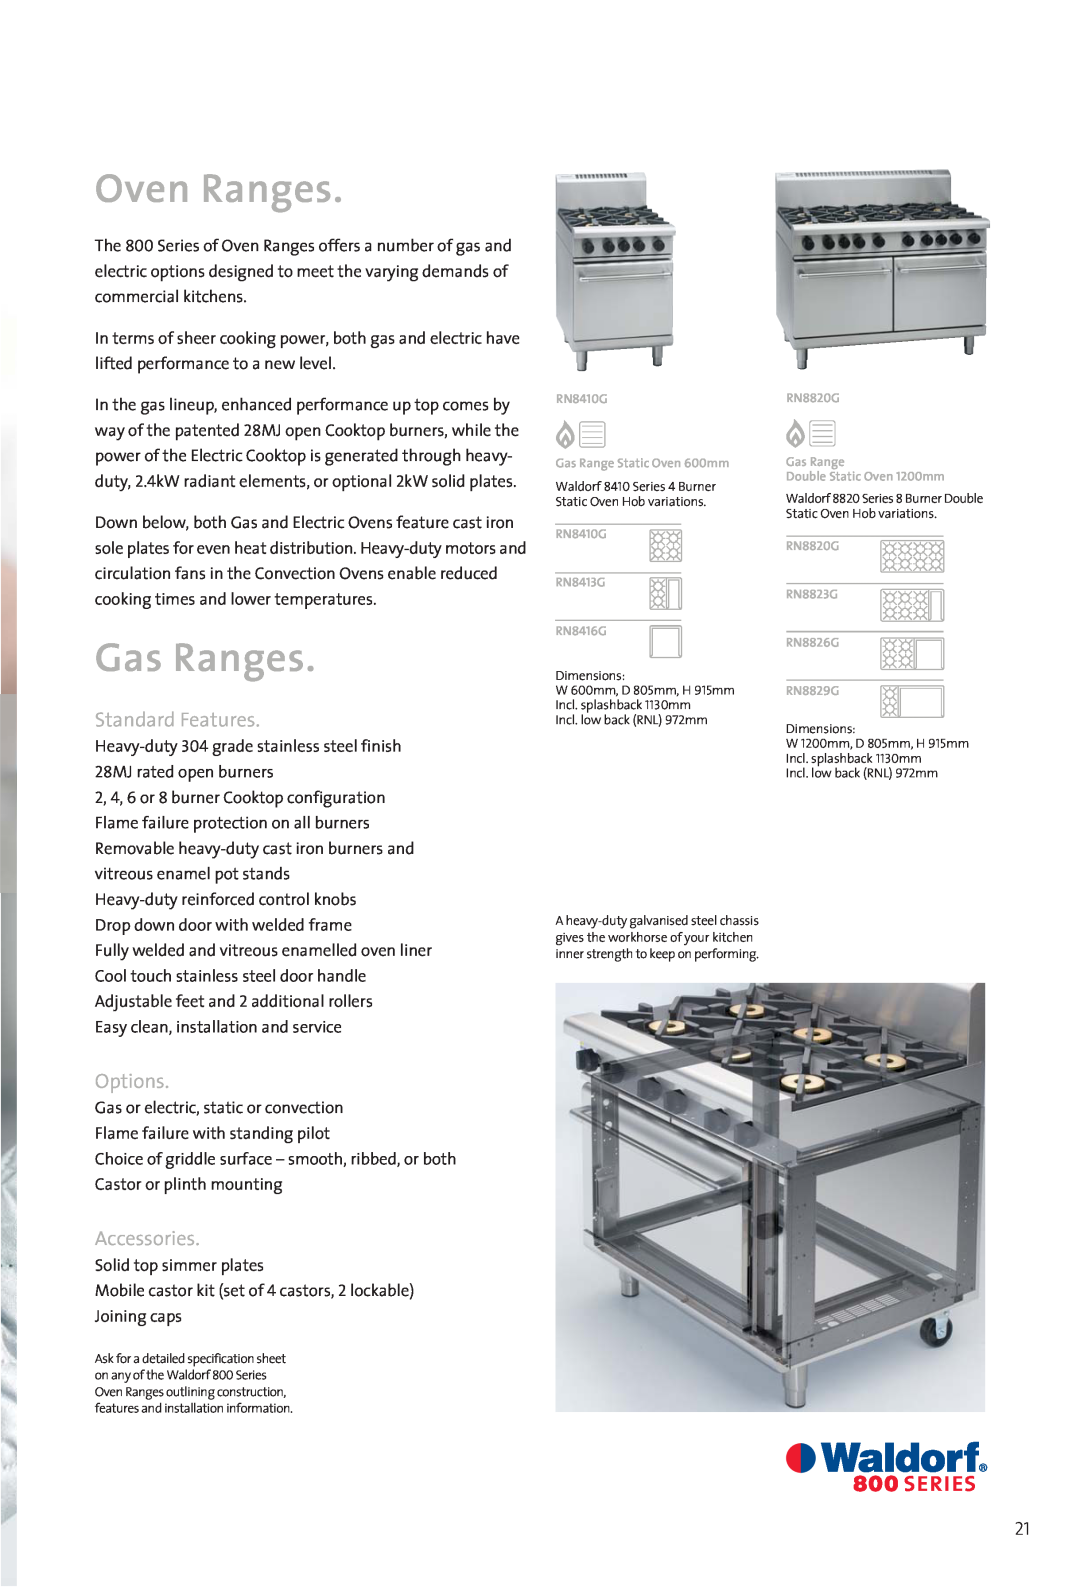 Moffat 800 manual Oven Ranges, Gas Ranges, Standard Features, Options, Accessories 